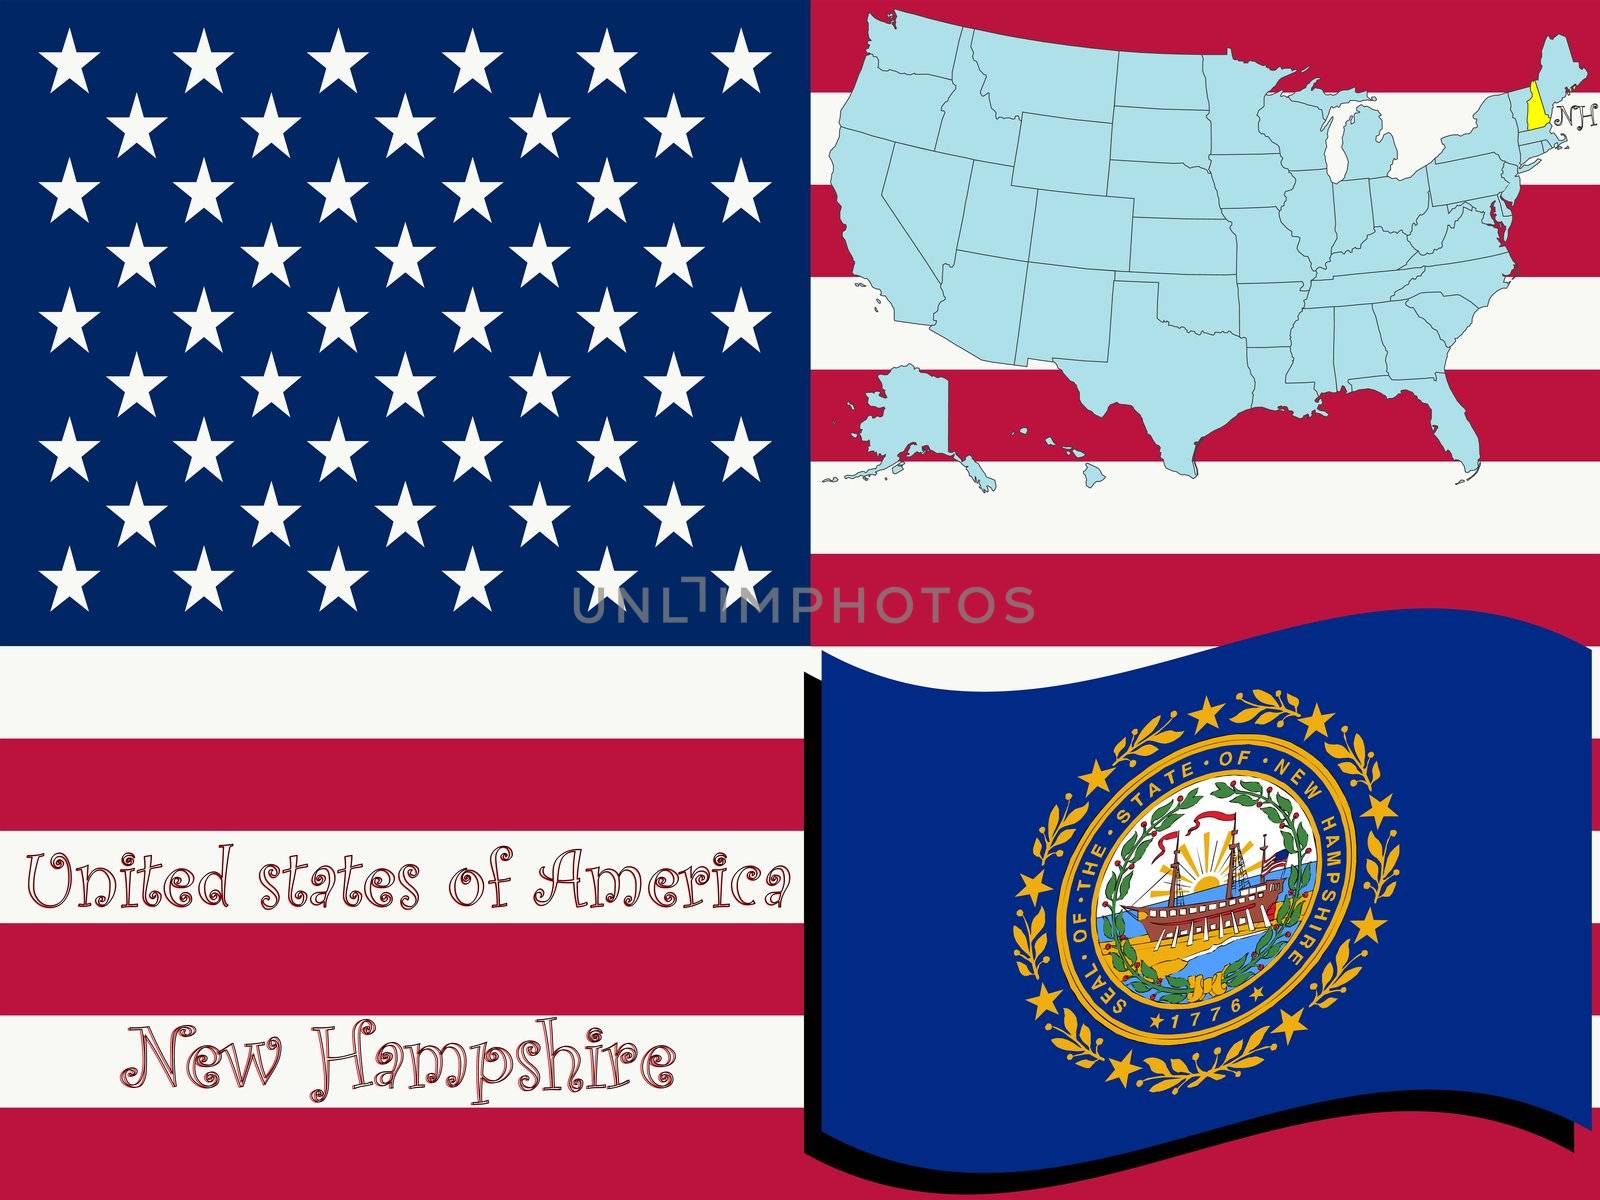 new hampshire state illustration by robertosch